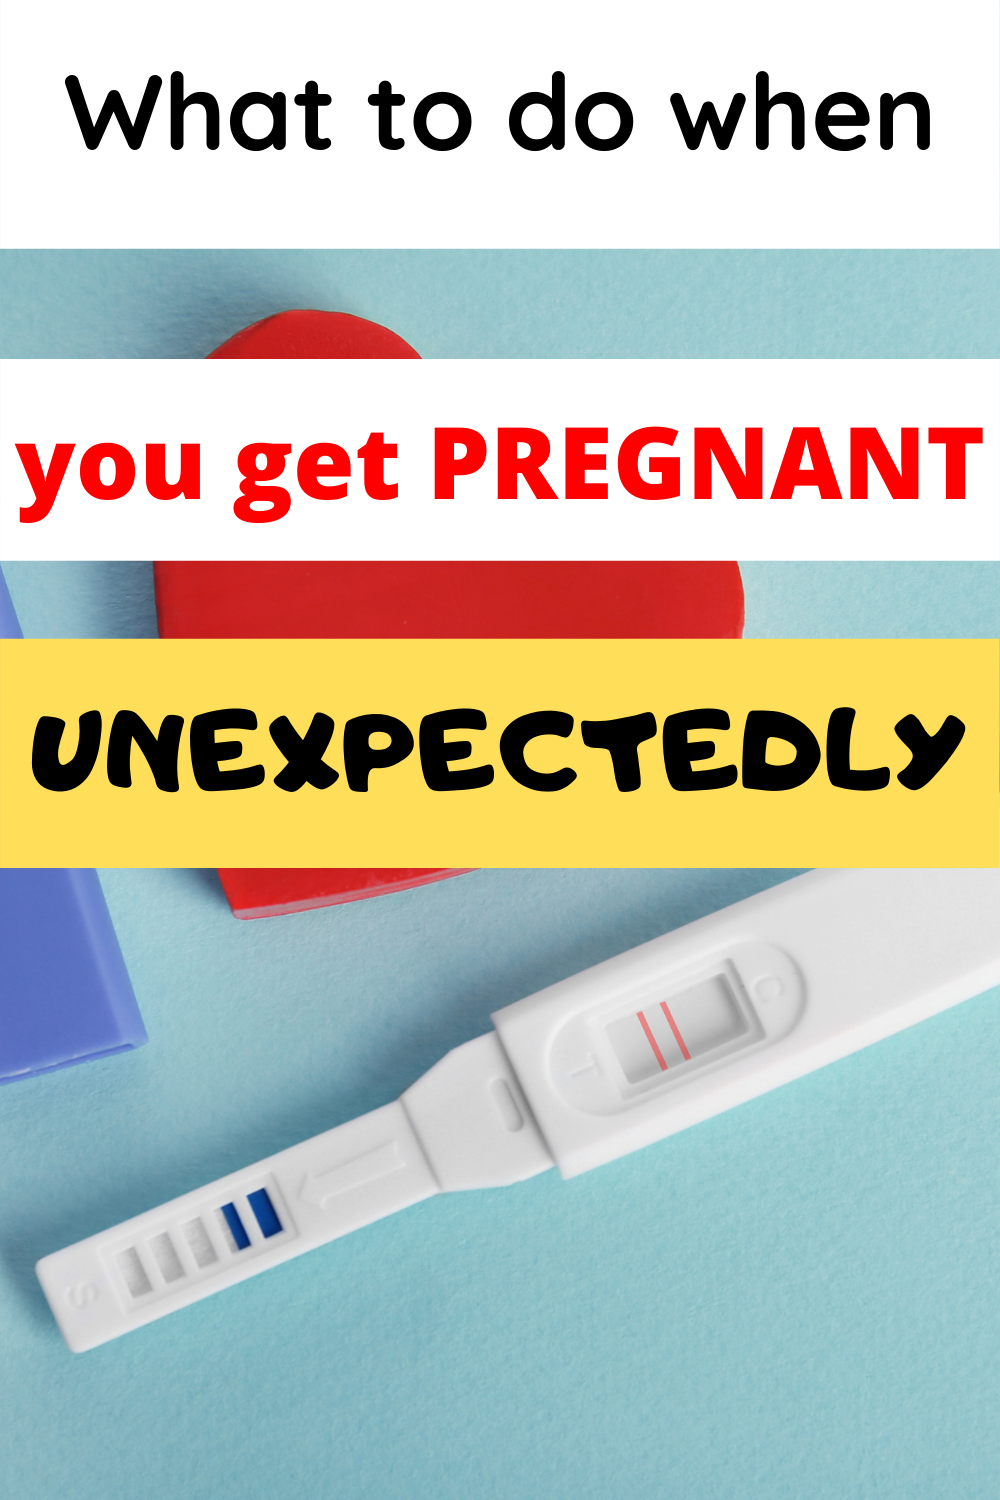 What to Absolutely Do About an Unplanned Pregnancy - Mothering Made Easy